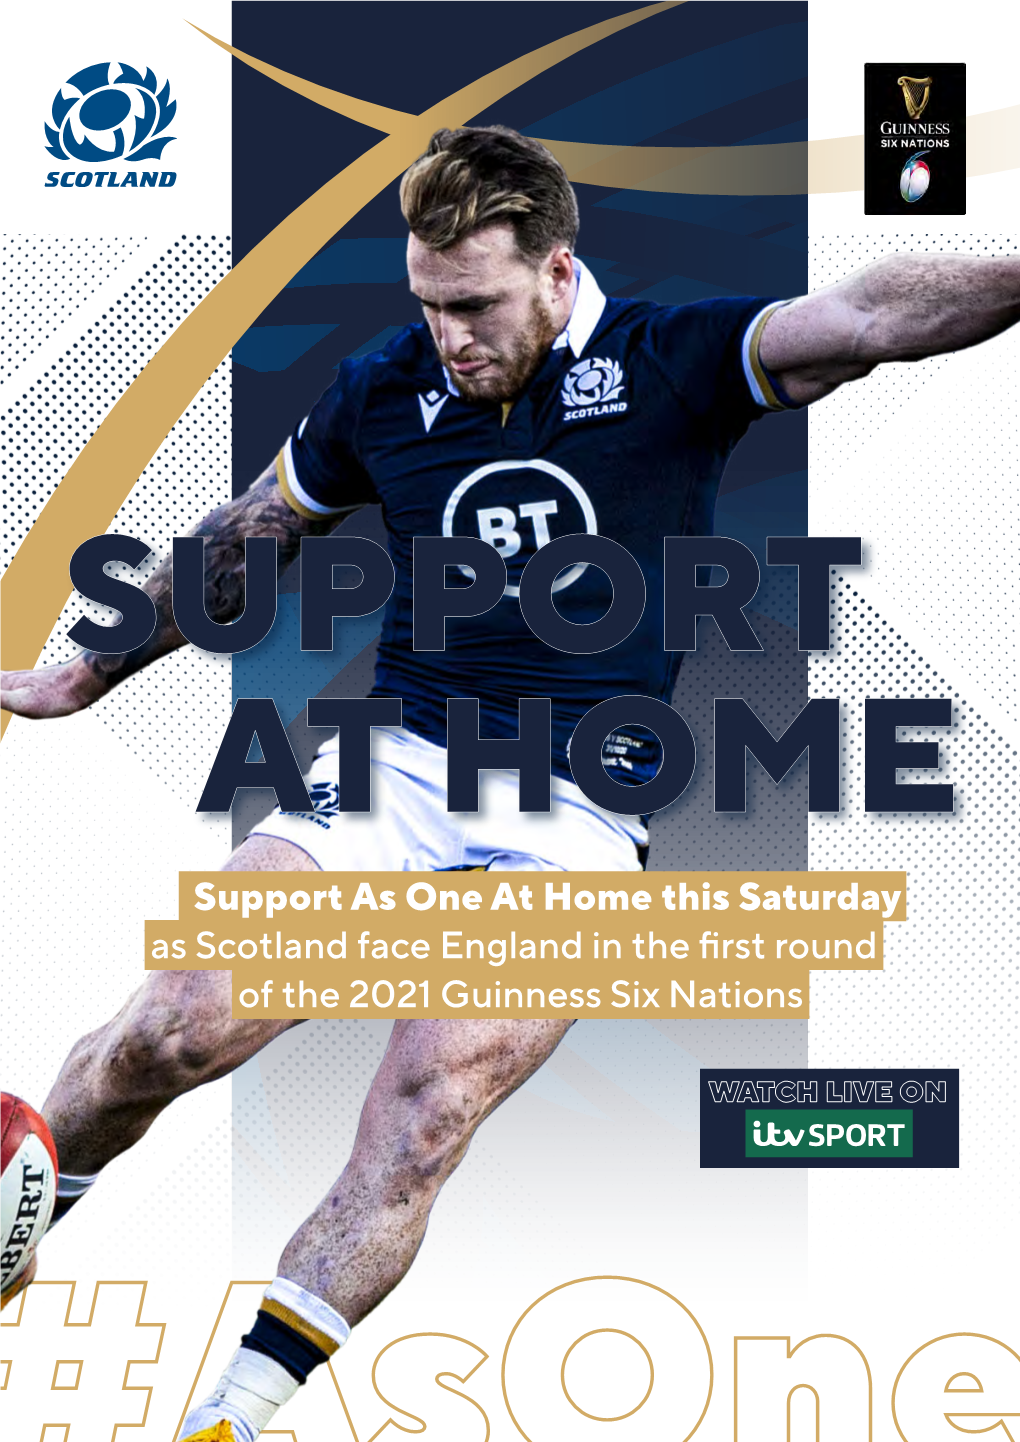 Support As One at Home This Saturday As Scotland Face England in the First Round of the 2021 Guinness Six Nations